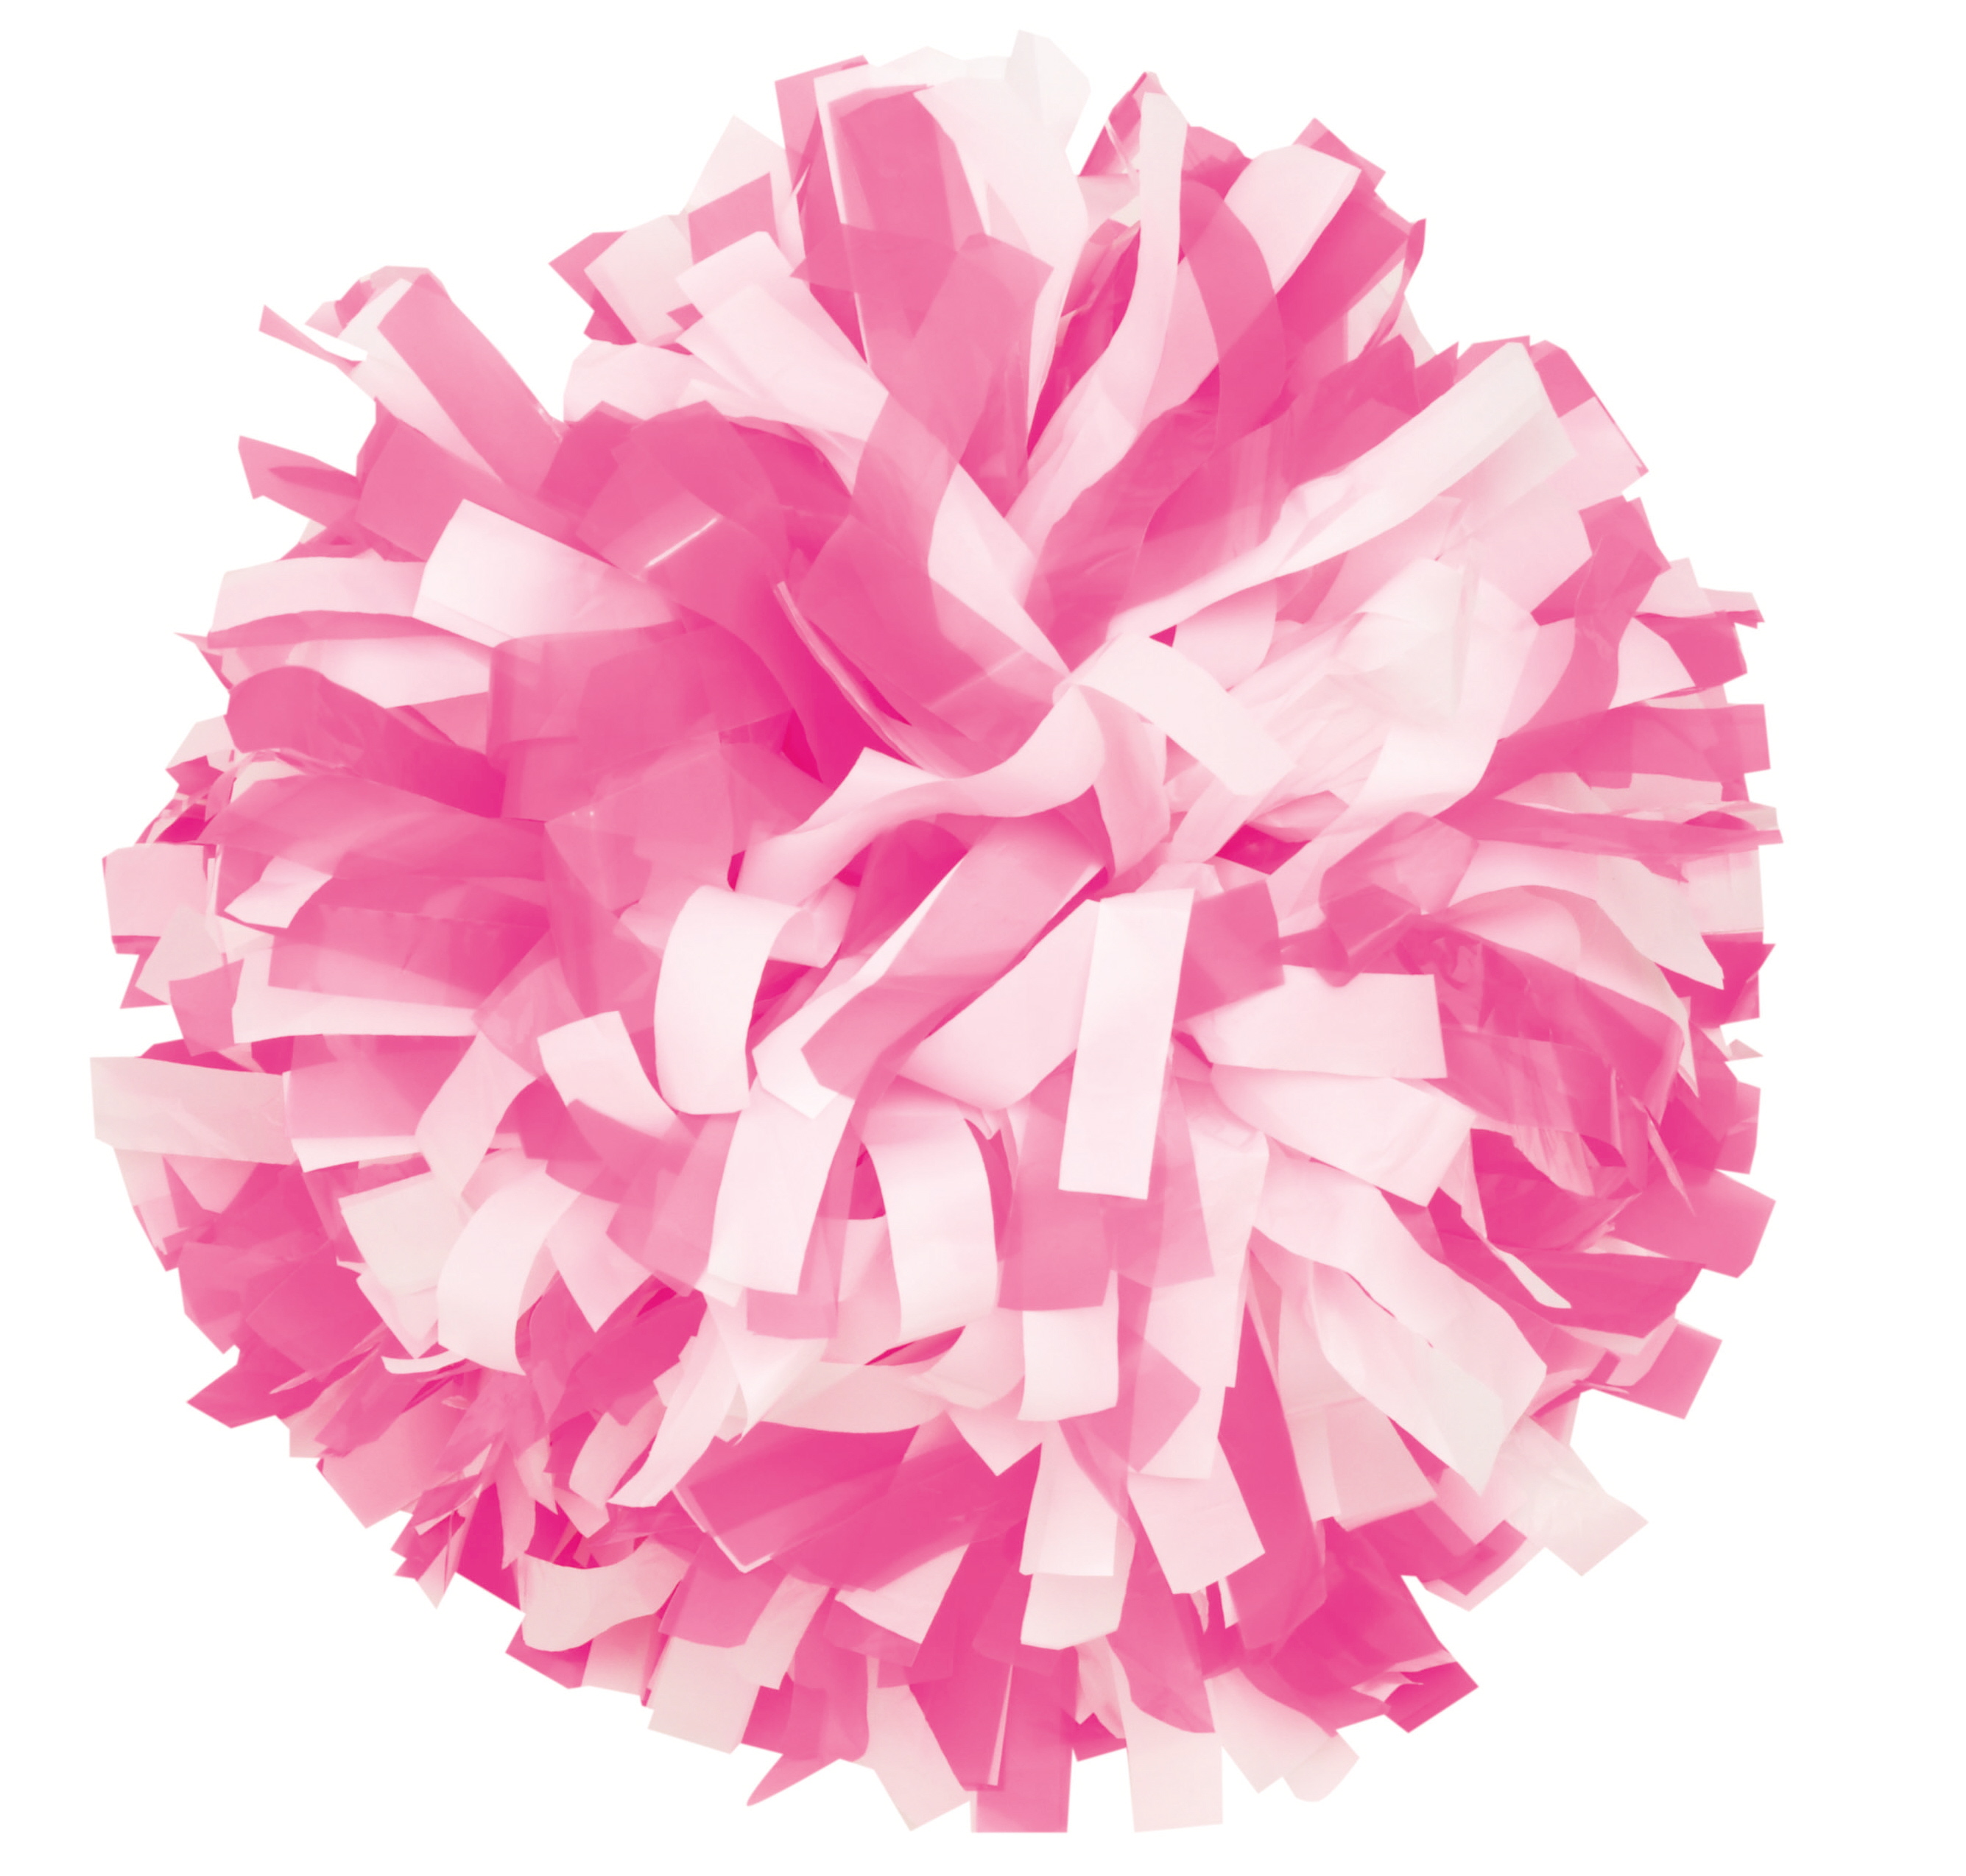 Pink And White Cheerleader Pom Poms Clip Art Library 4472 | The Best ...